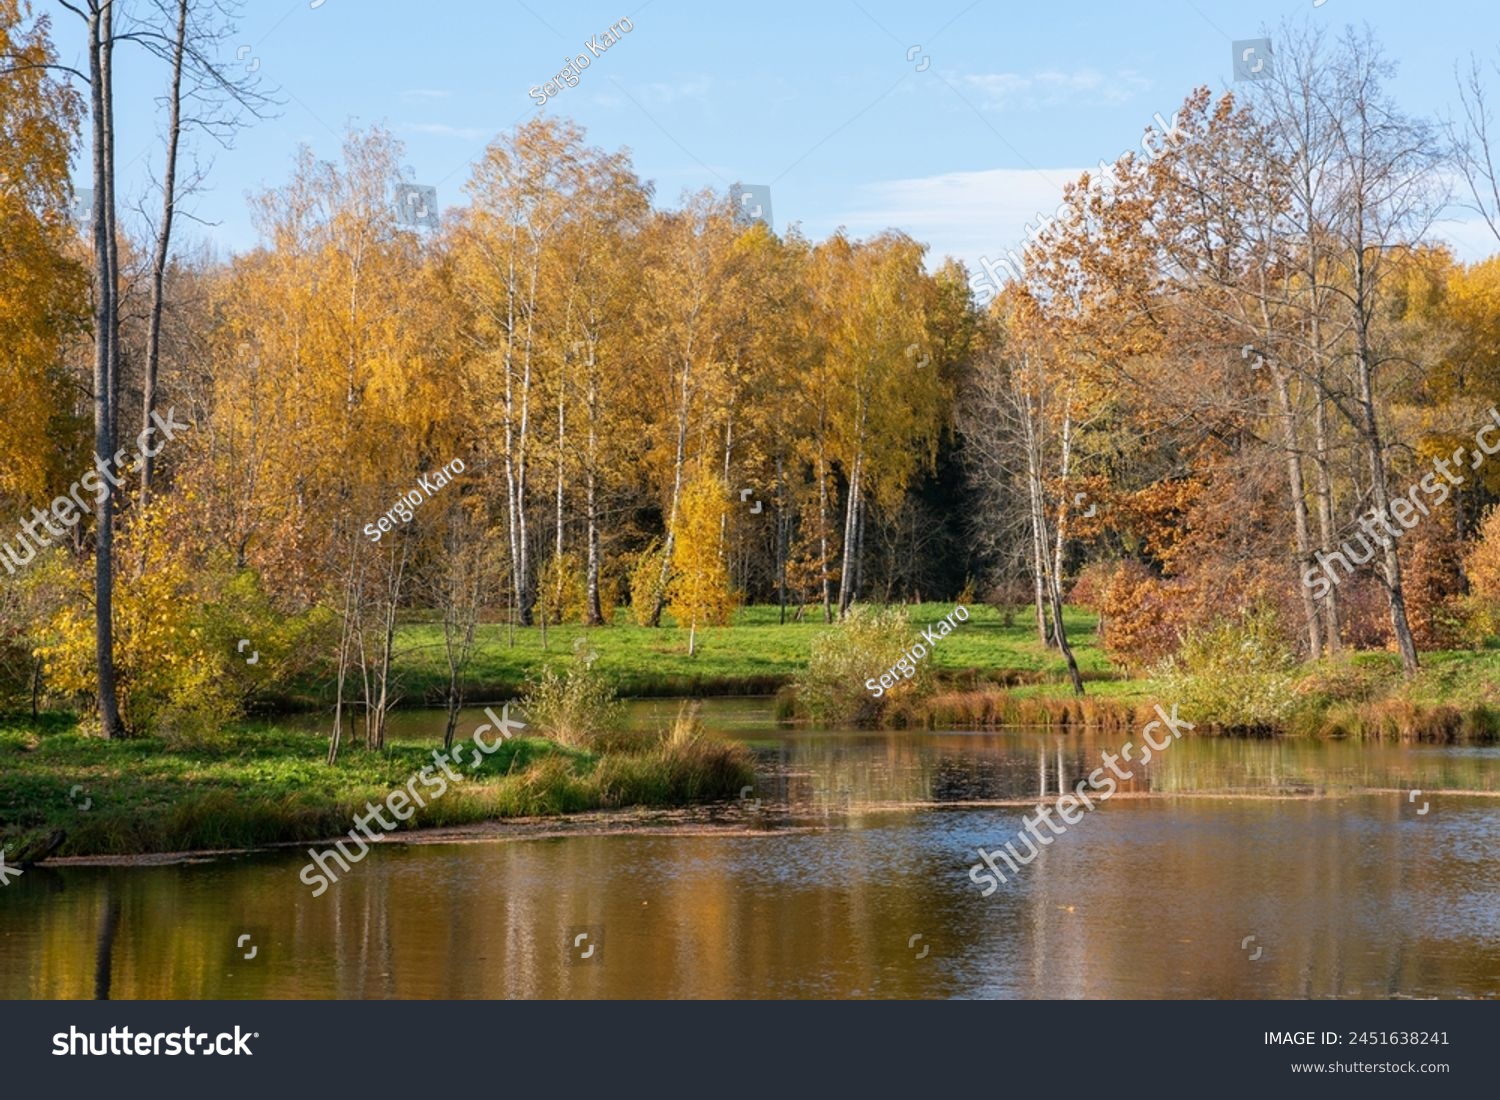 Beautiful autumn landscape with a lake in a golden-brown forest and a bright green meadow, and coastal grass near by the lakeshore, under a blue sky. Reflection of the blue sky in the water. #2451638241